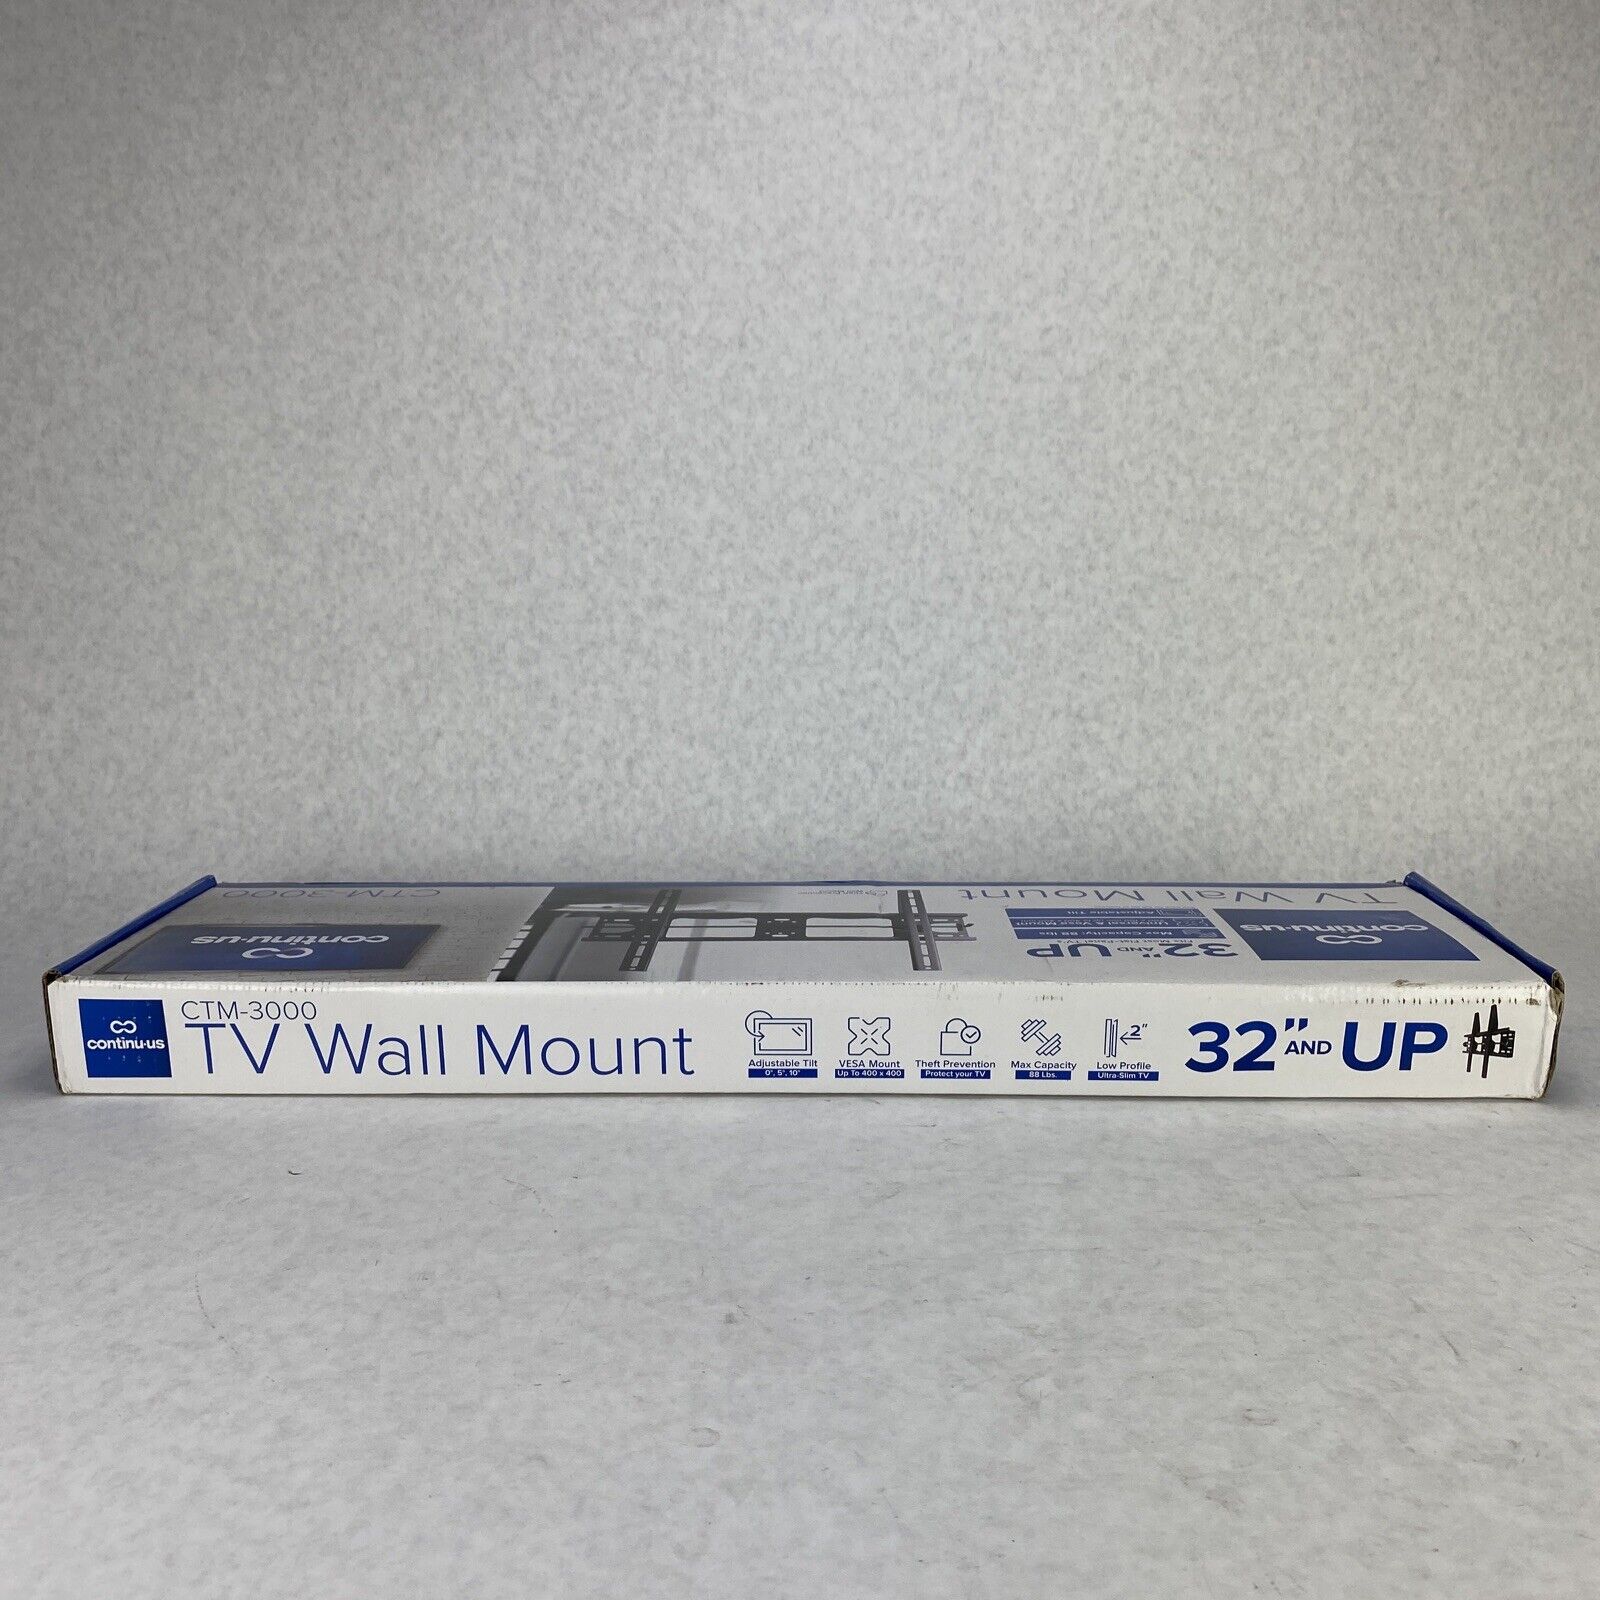 CONTINUUS CTM-3000 TV Wall Mount 32 Inches And Up Max Capacity 88 lbs